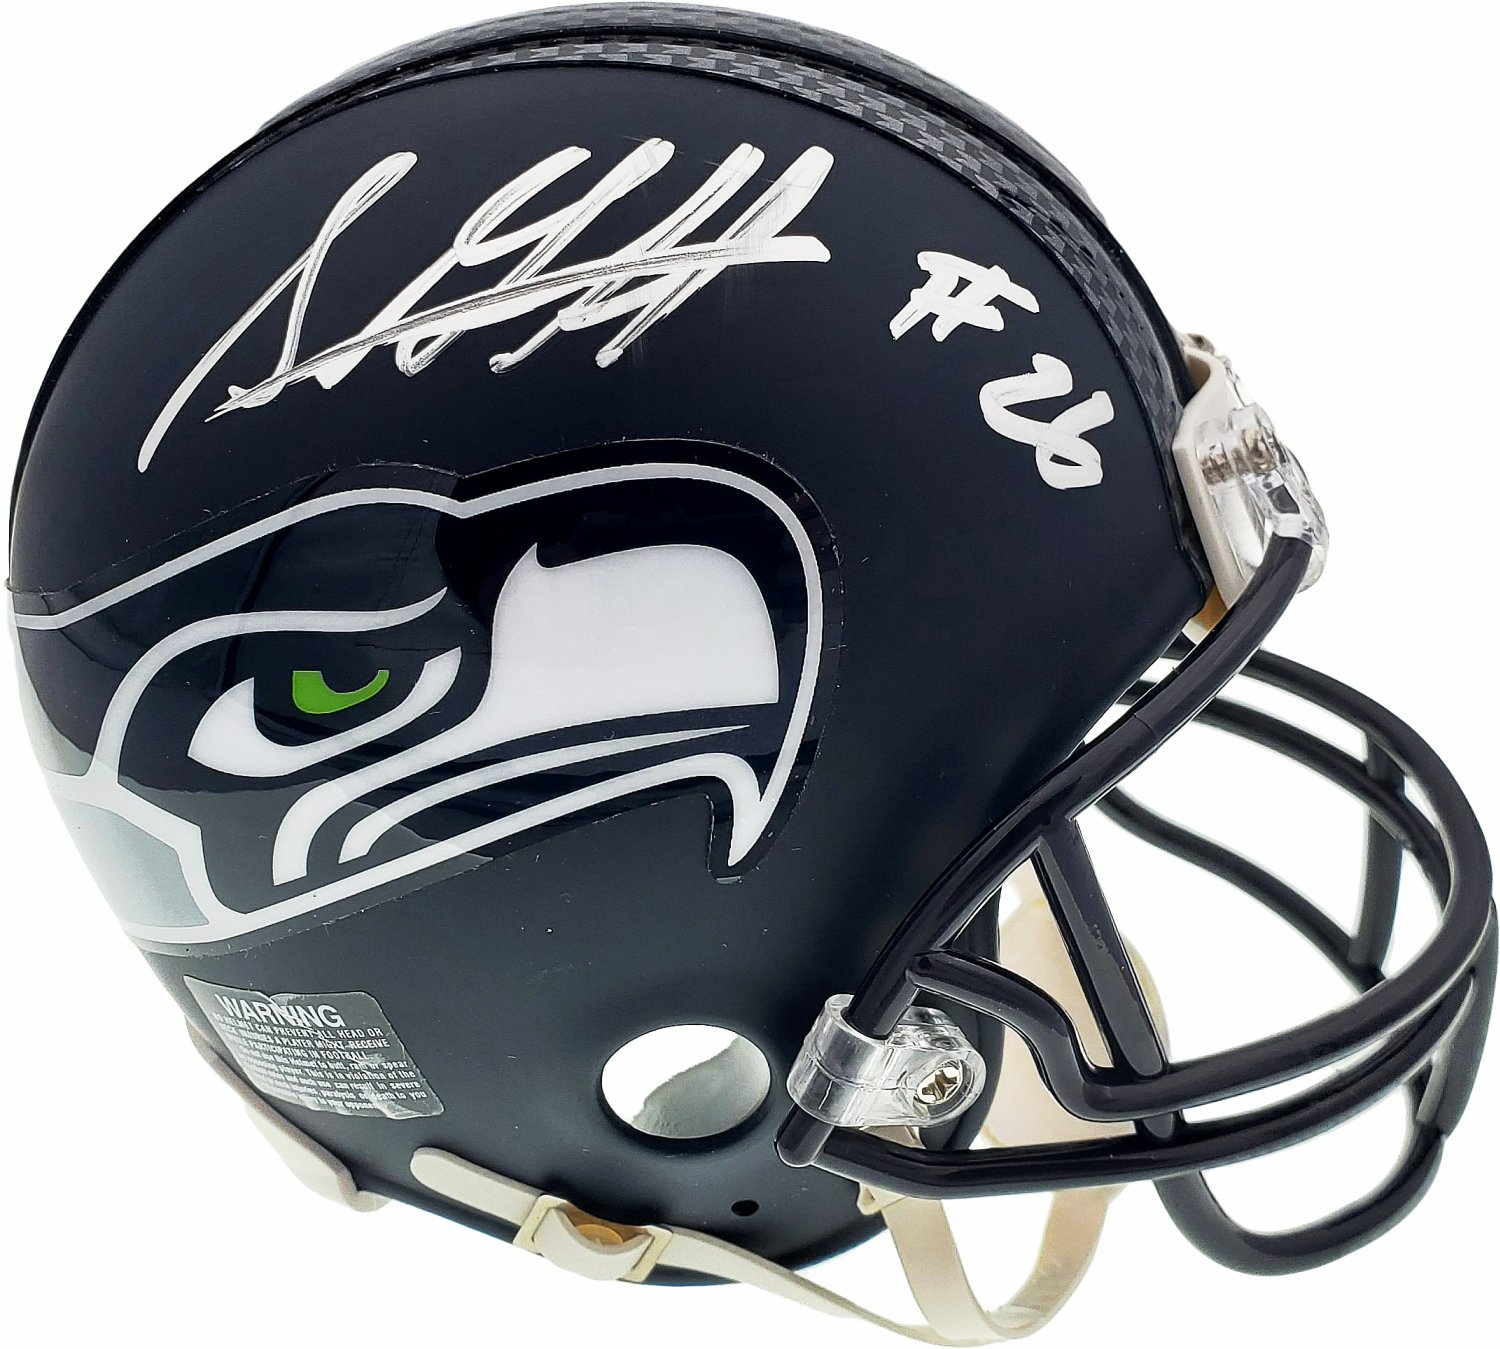 Shaquill Griffin Autographed Signed Seattle Seahawks Mini Helmet